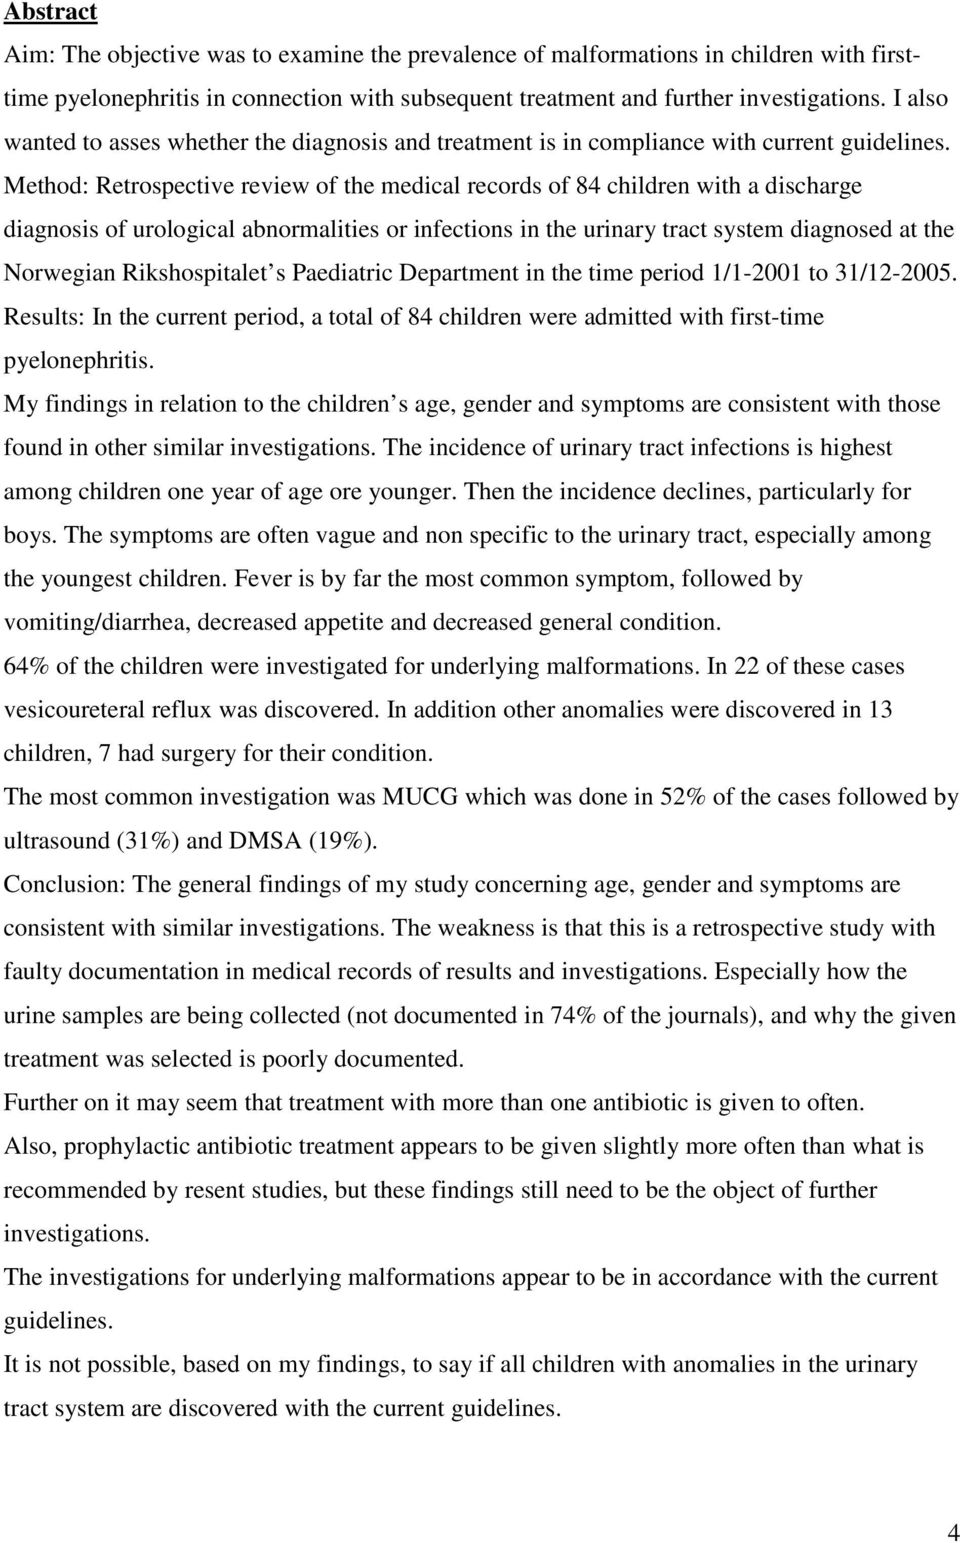 Method: Retrospective review of the medical records of 84 children with a discharge diagnosis of urological abnormalities or infections in the urinary tract system diagnosed at the Norwegian